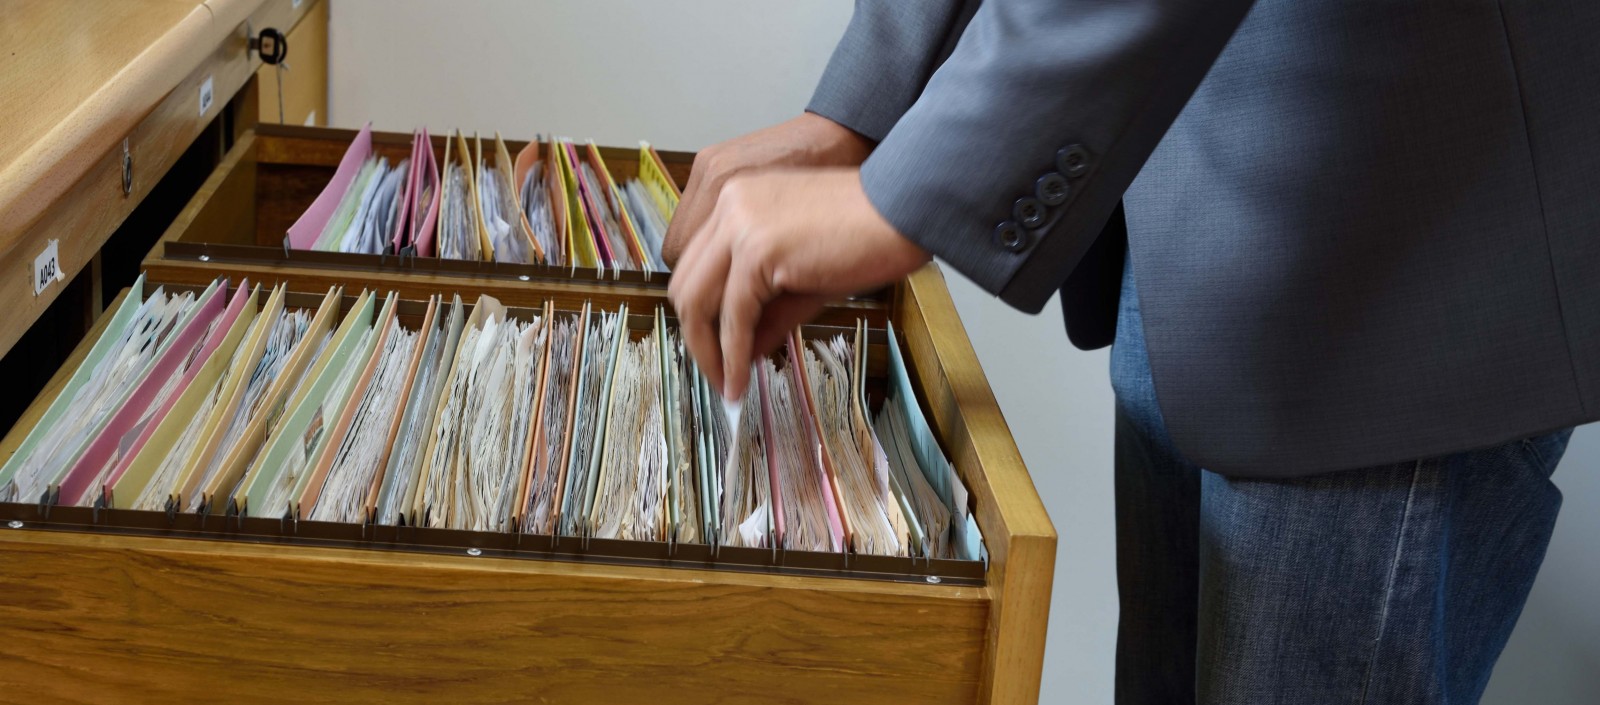 Here are some basic record retention guidelines for employers.